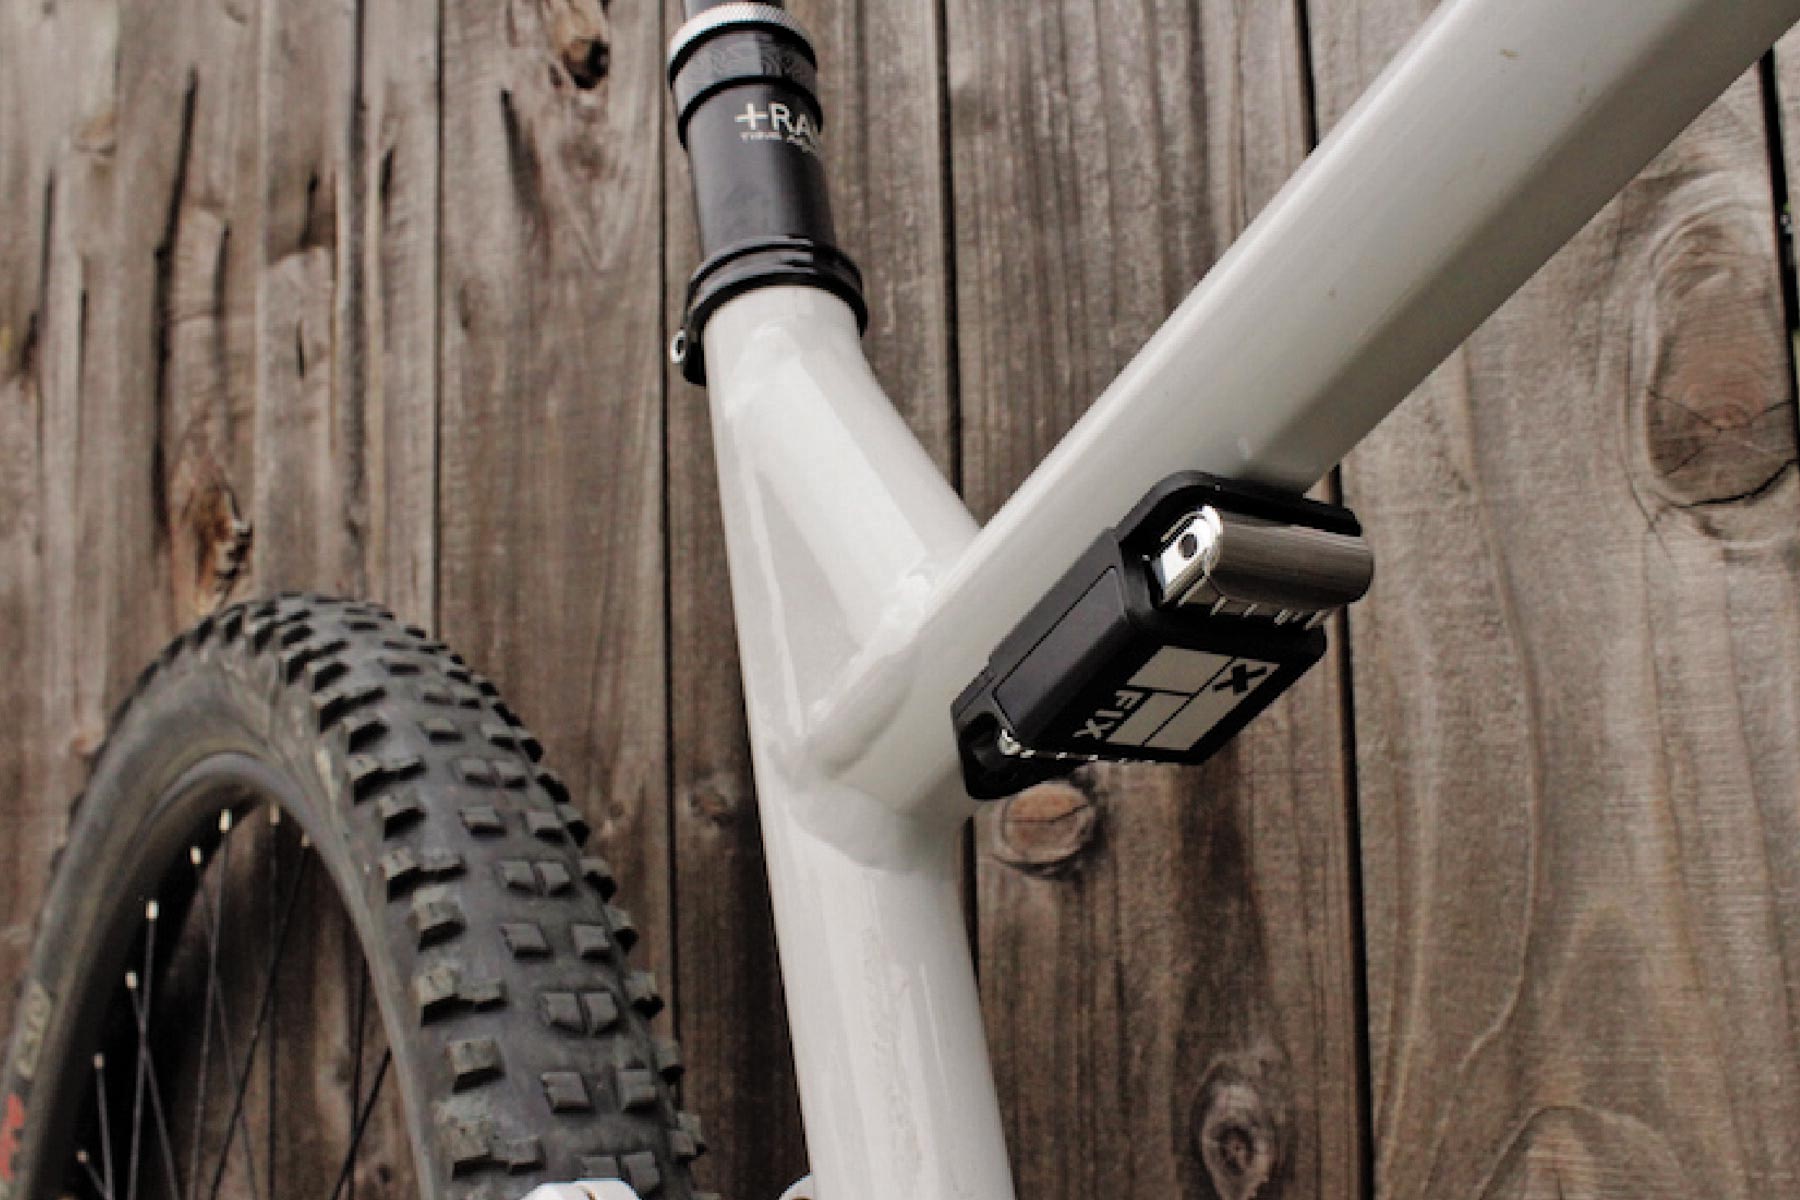 Fix Mfg Payload Pocket Puts EDC Multi-Tools On Your Bike with Simple Bolt-On Mount